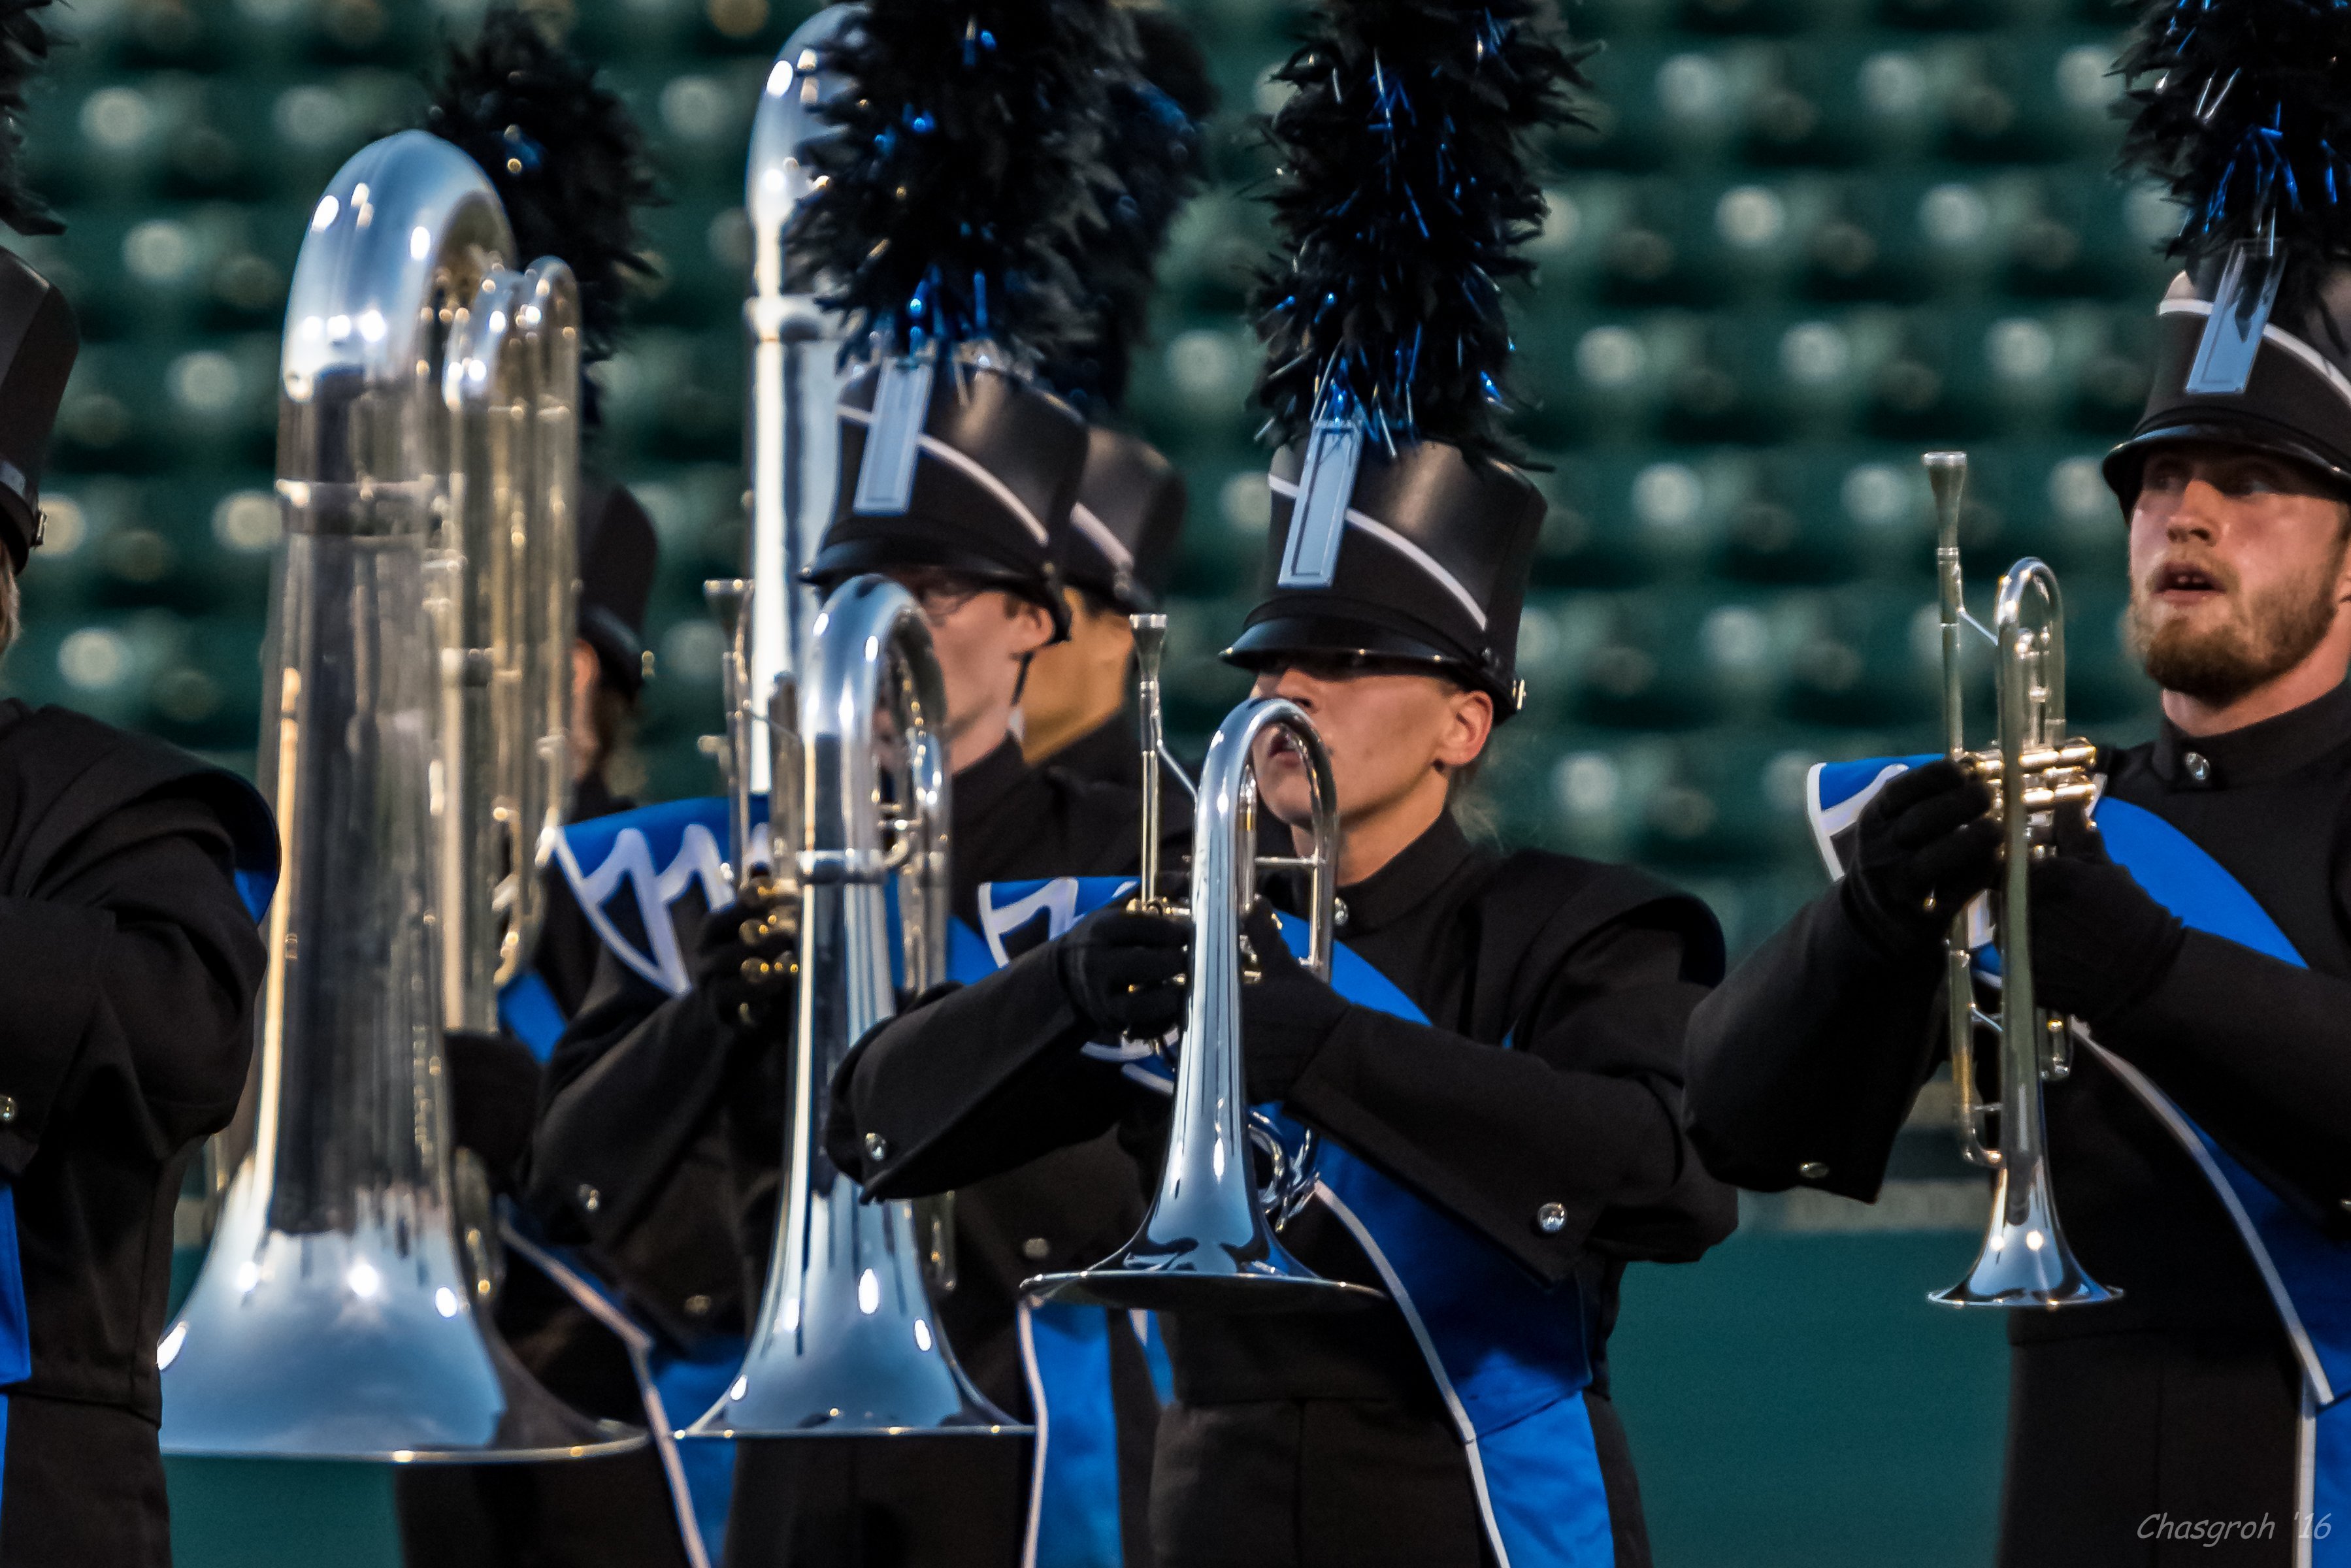 Minnesota Brass Drum and Bugle Corps to go Inactive in 2018